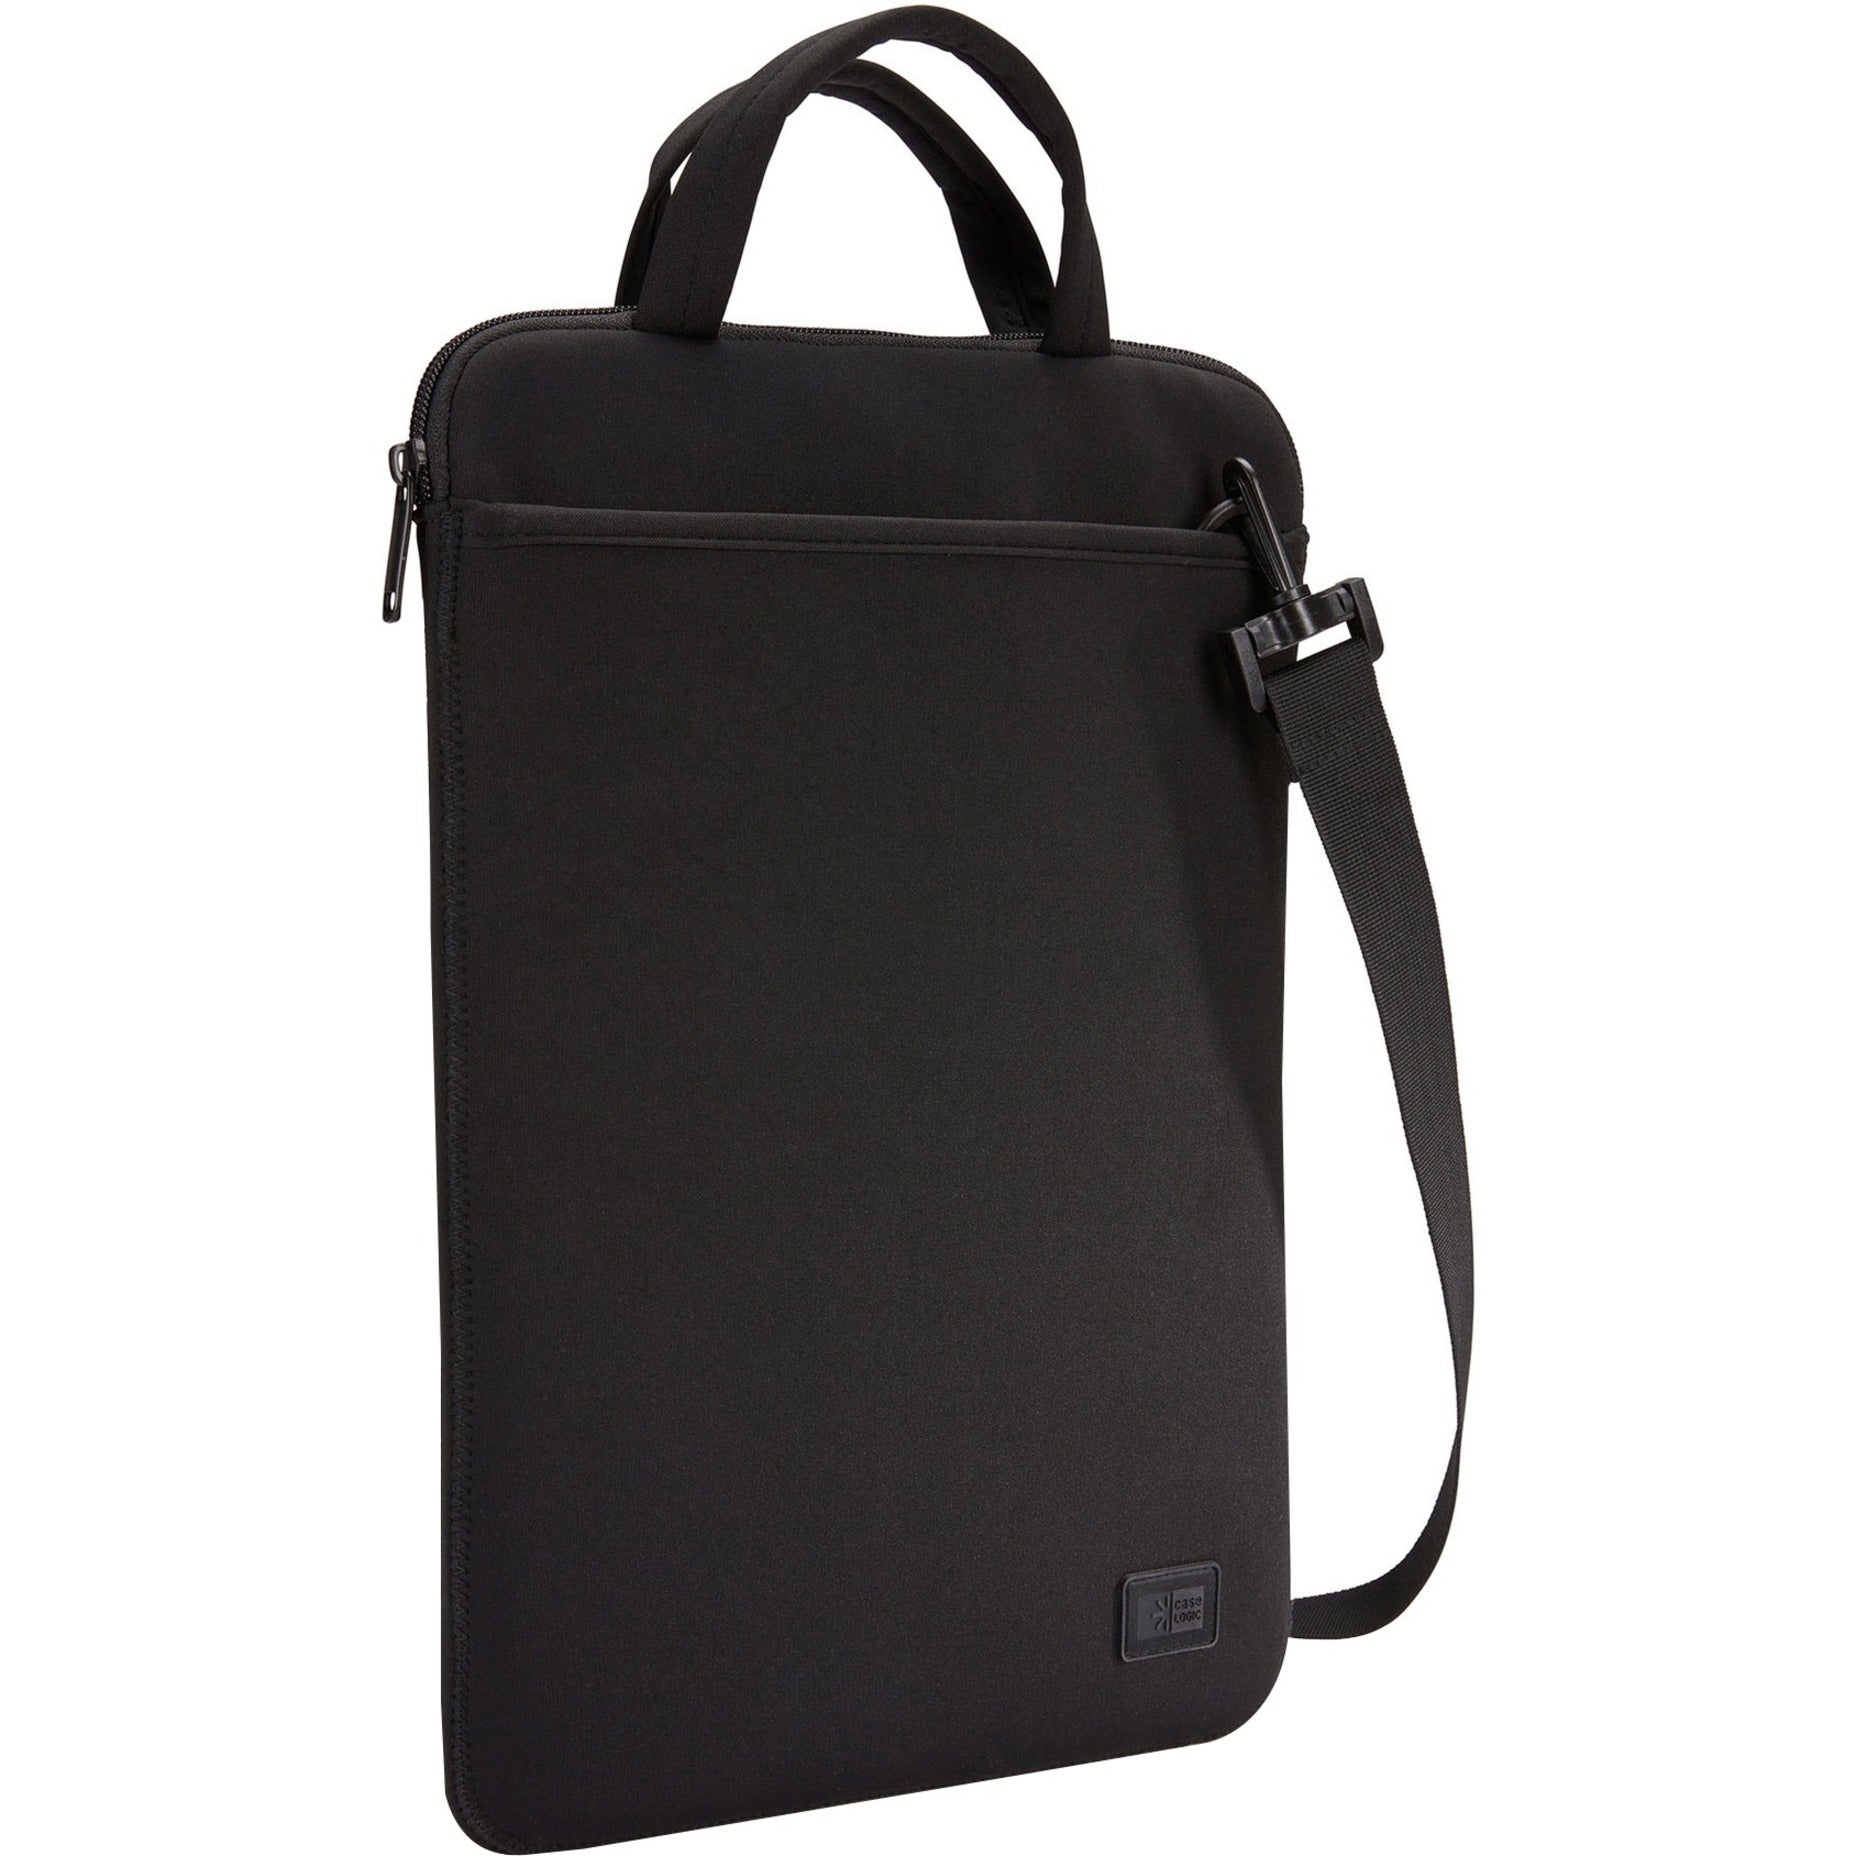 Case Logic 3204734 Quantic 14" Chromebook Sleeve, Black - 25 Year Warranty, Polyester Material